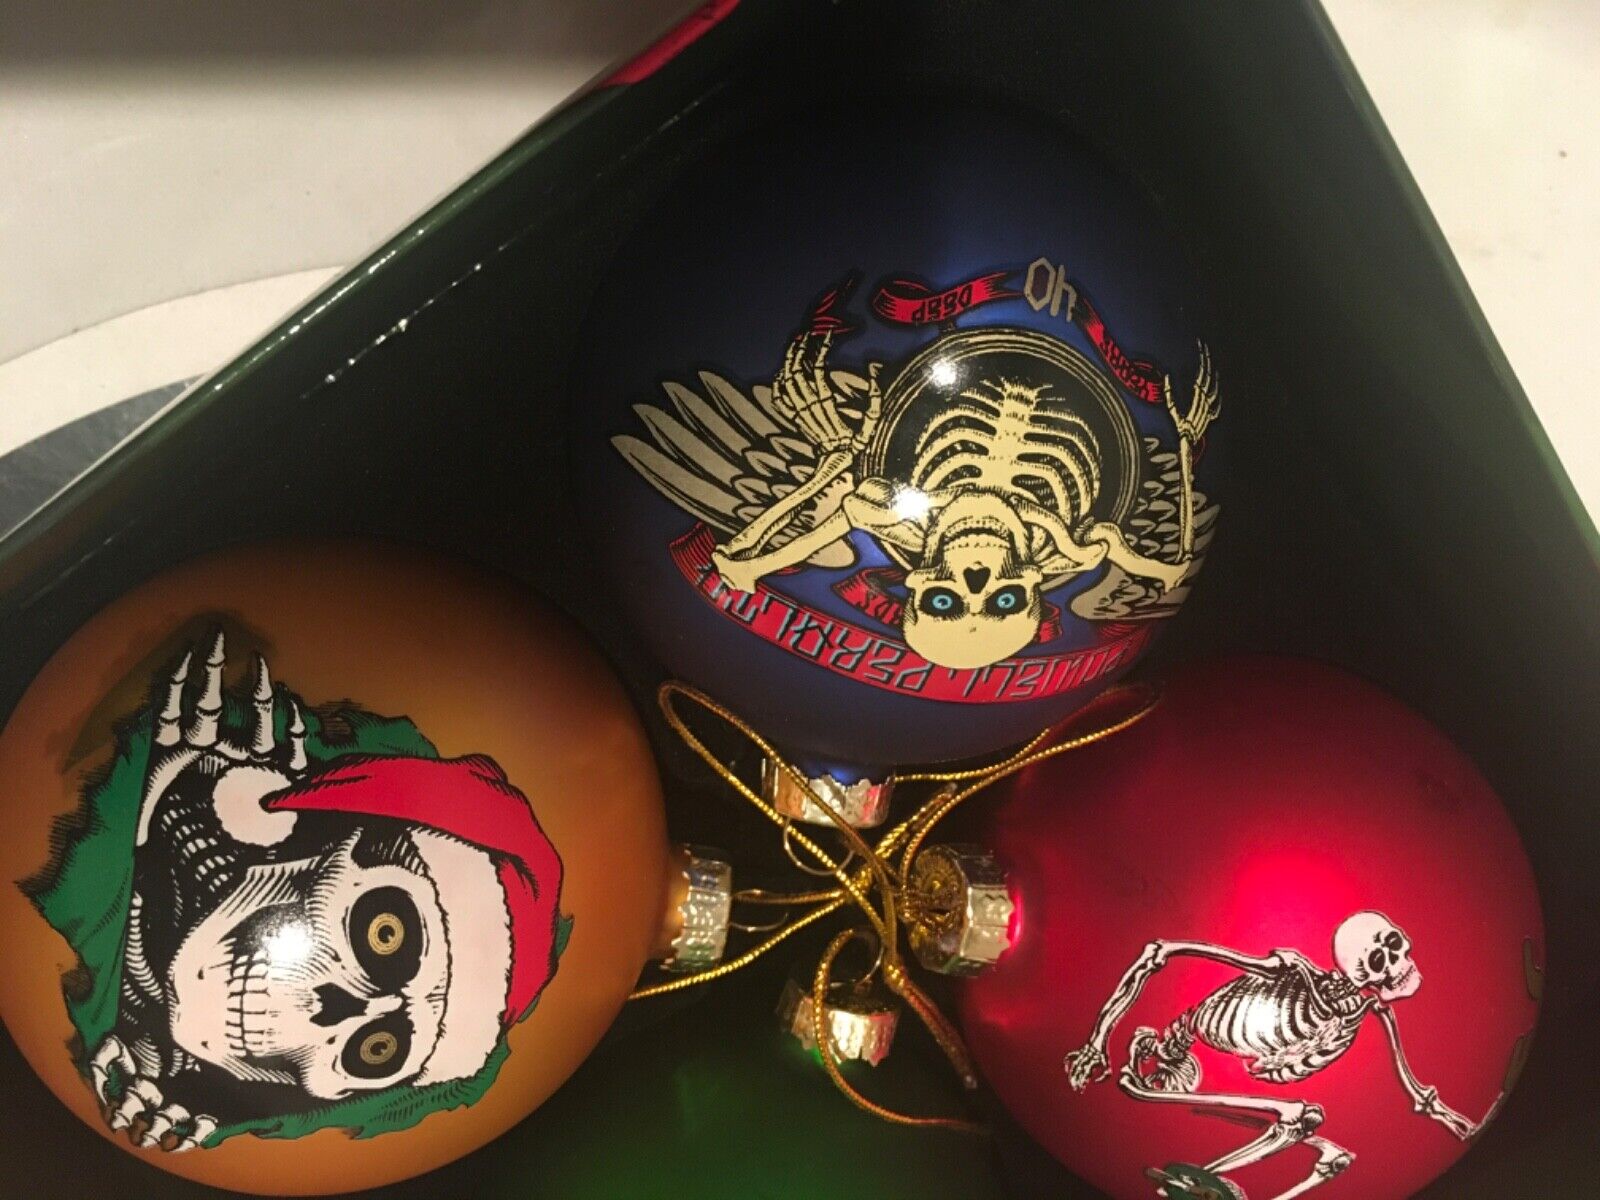 4- 2016 Powell Peralta Skateboard Christmas Ornaments. EXCELLENT CONDITION